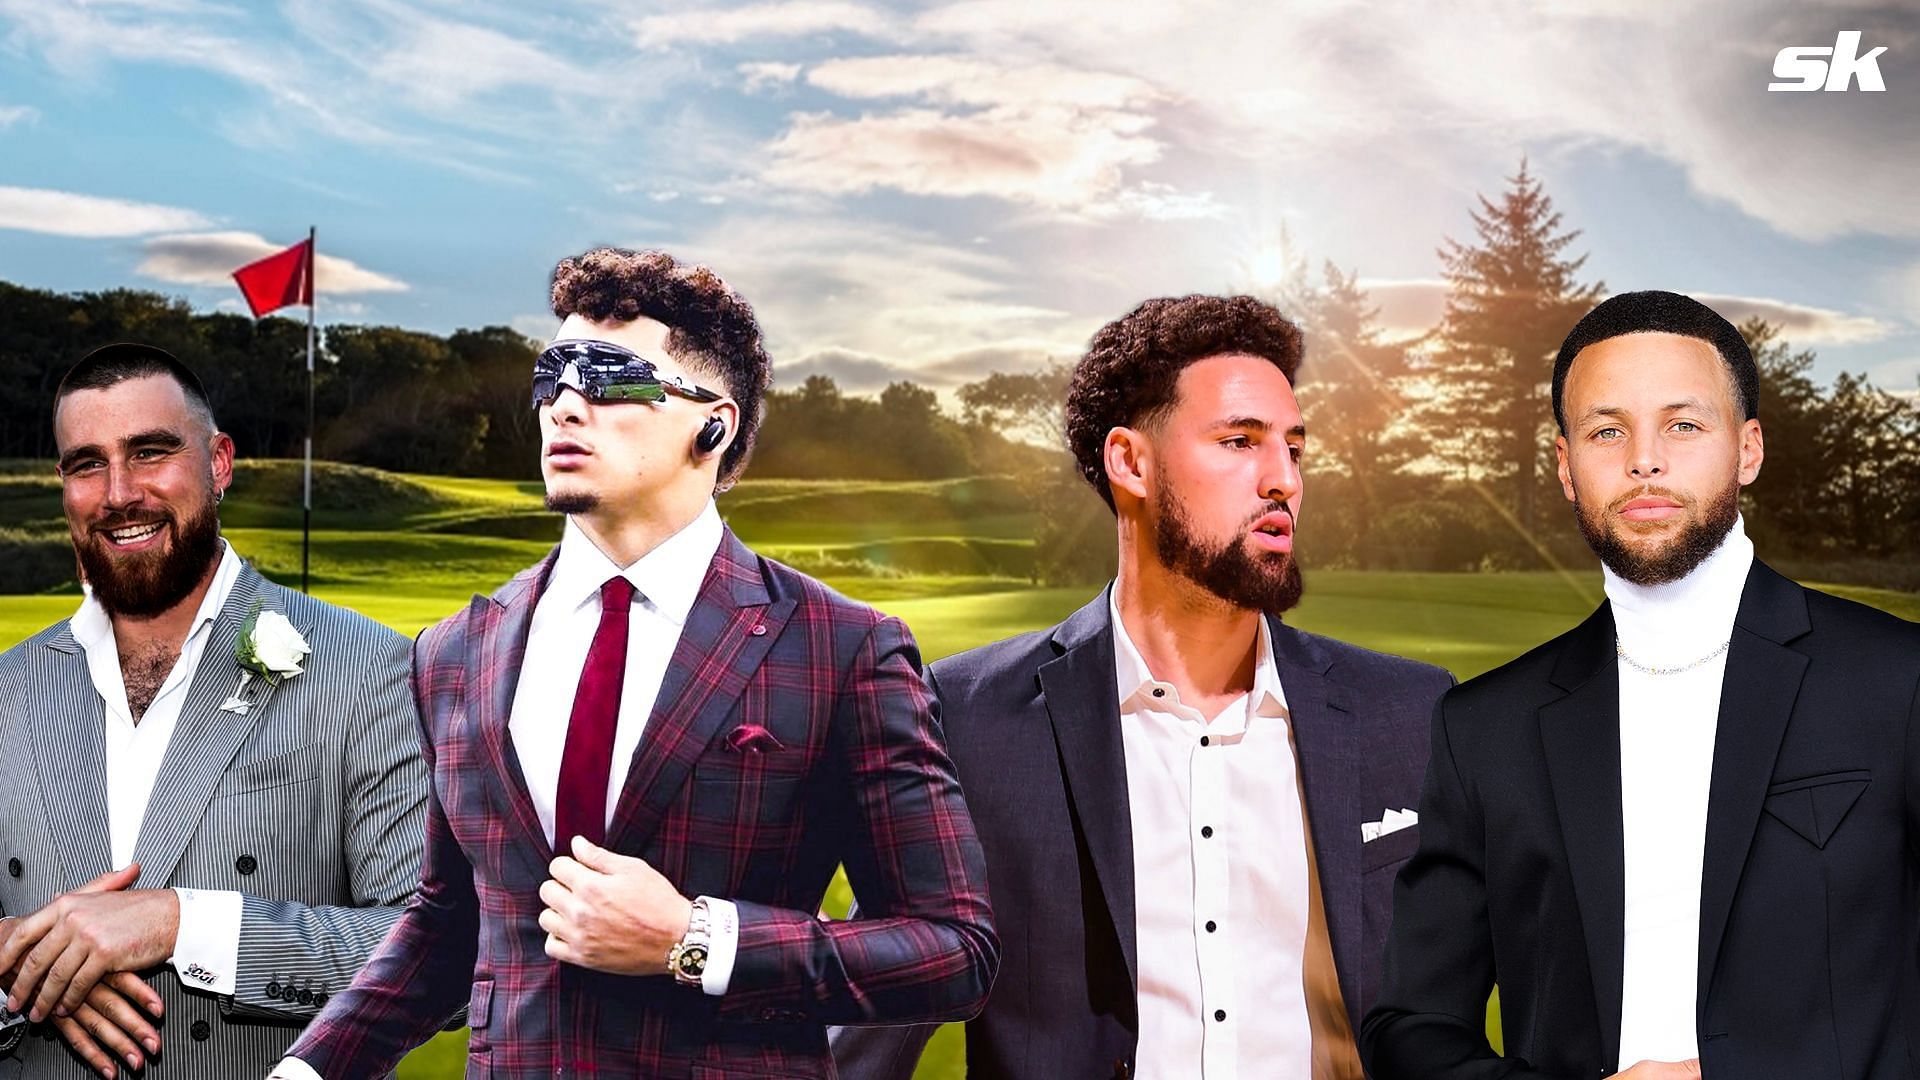 Patrick Mahomes and Travis Kelce won over Stephen Curry and Klay Thompson in the latest edition of &quot;The Match&quot; exhibition golf.